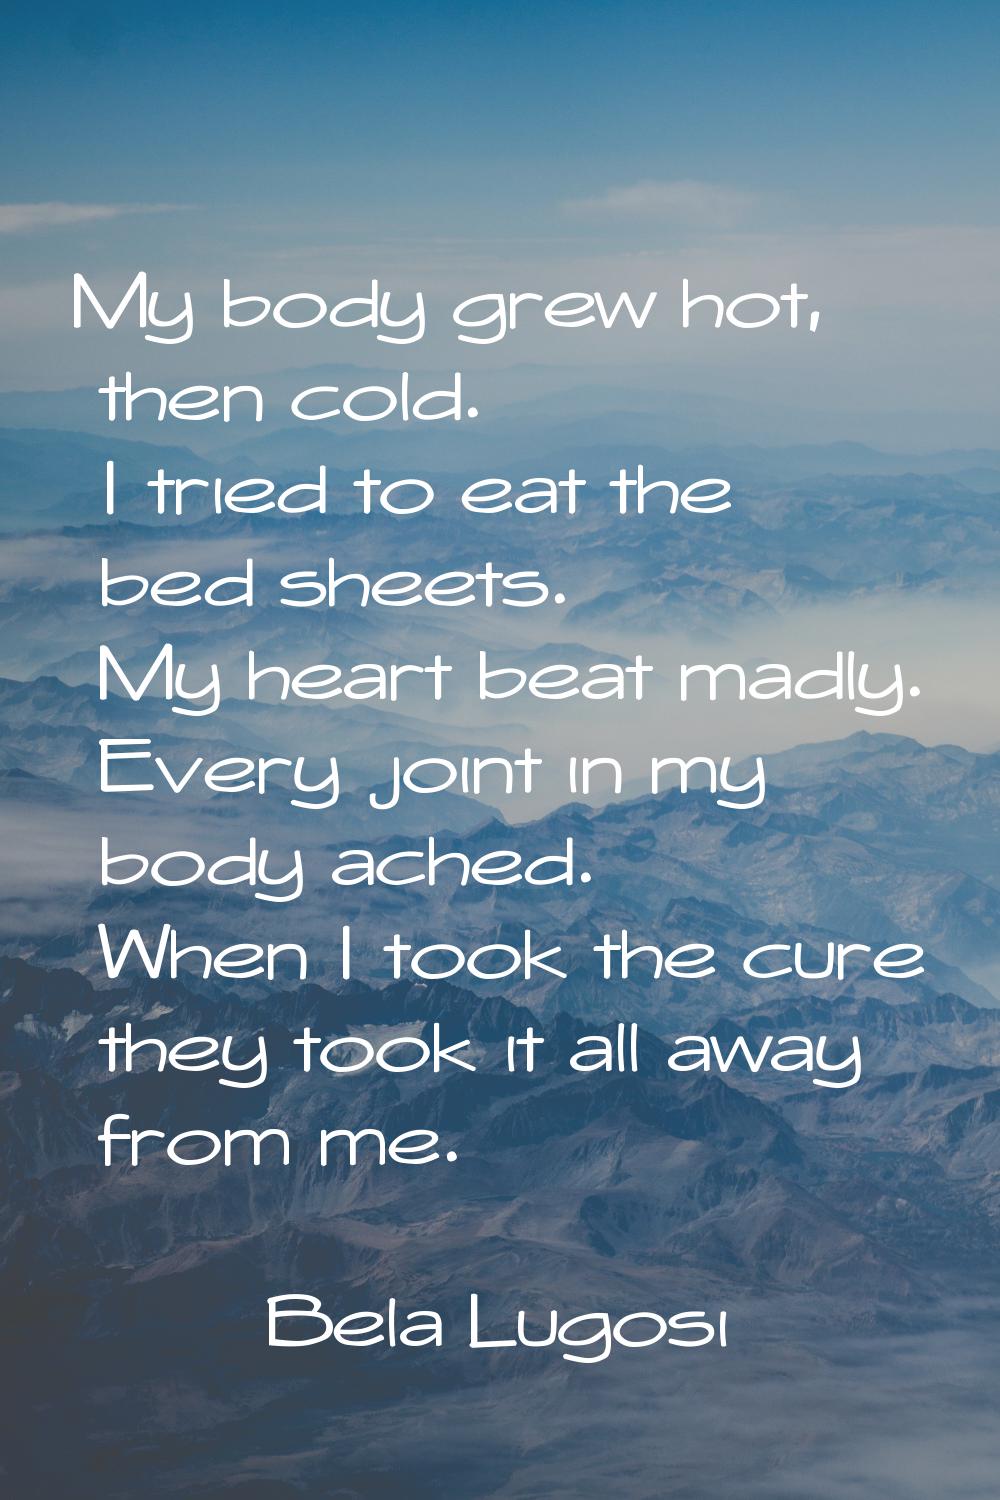 My body grew hot, then cold. I tried to eat the bed sheets. My heart beat madly. Every joint in my 